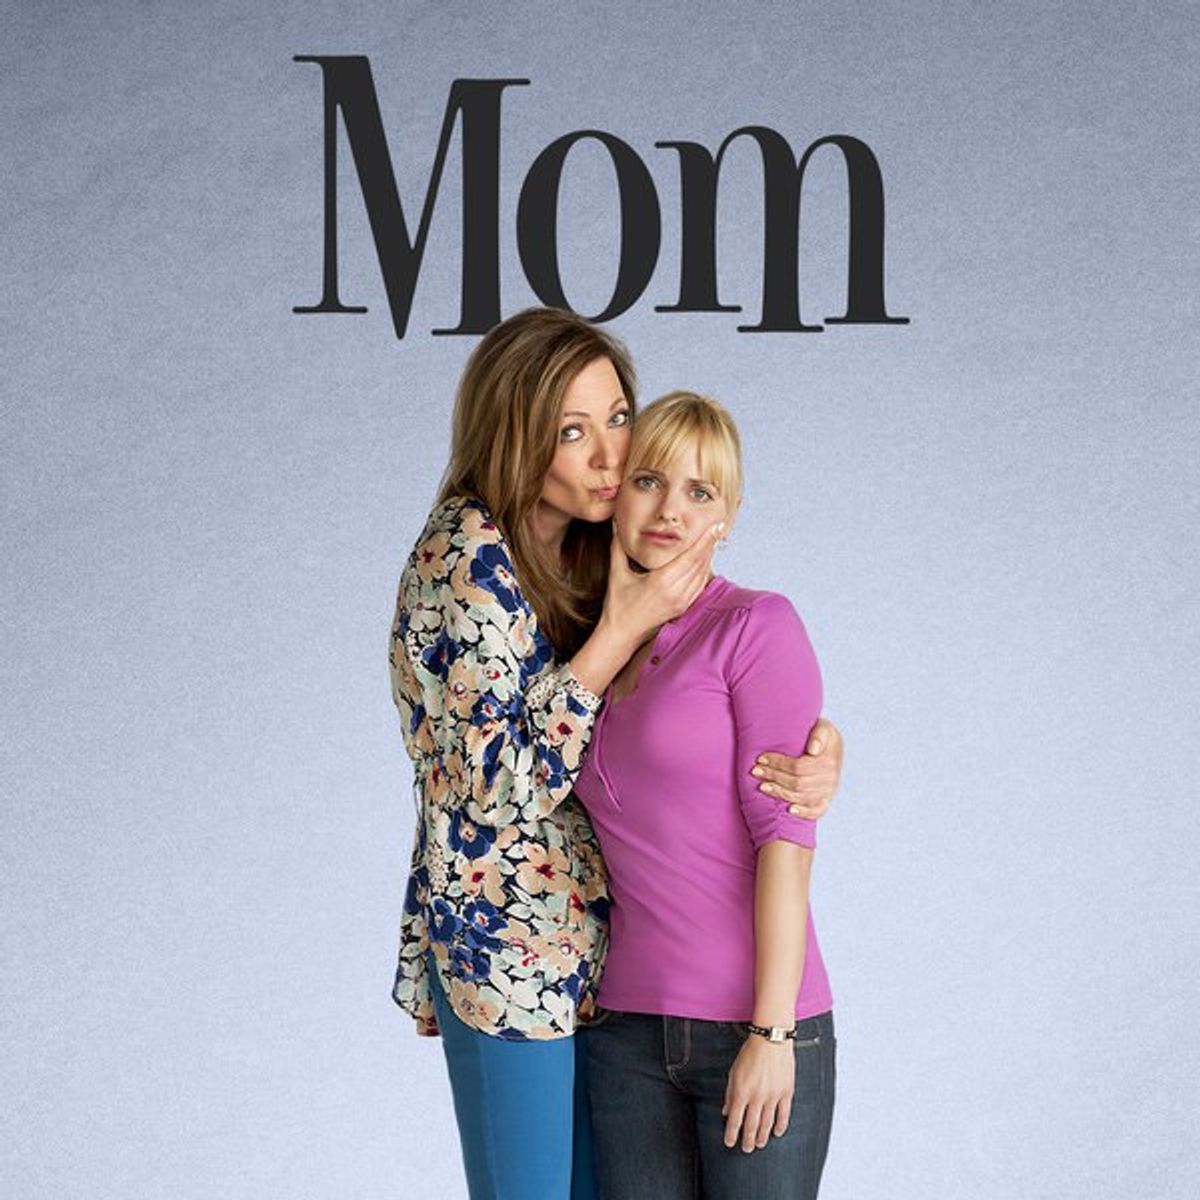 Mom Is One Of The Best Most Underrated Tv Shows You Ll Ever Watch